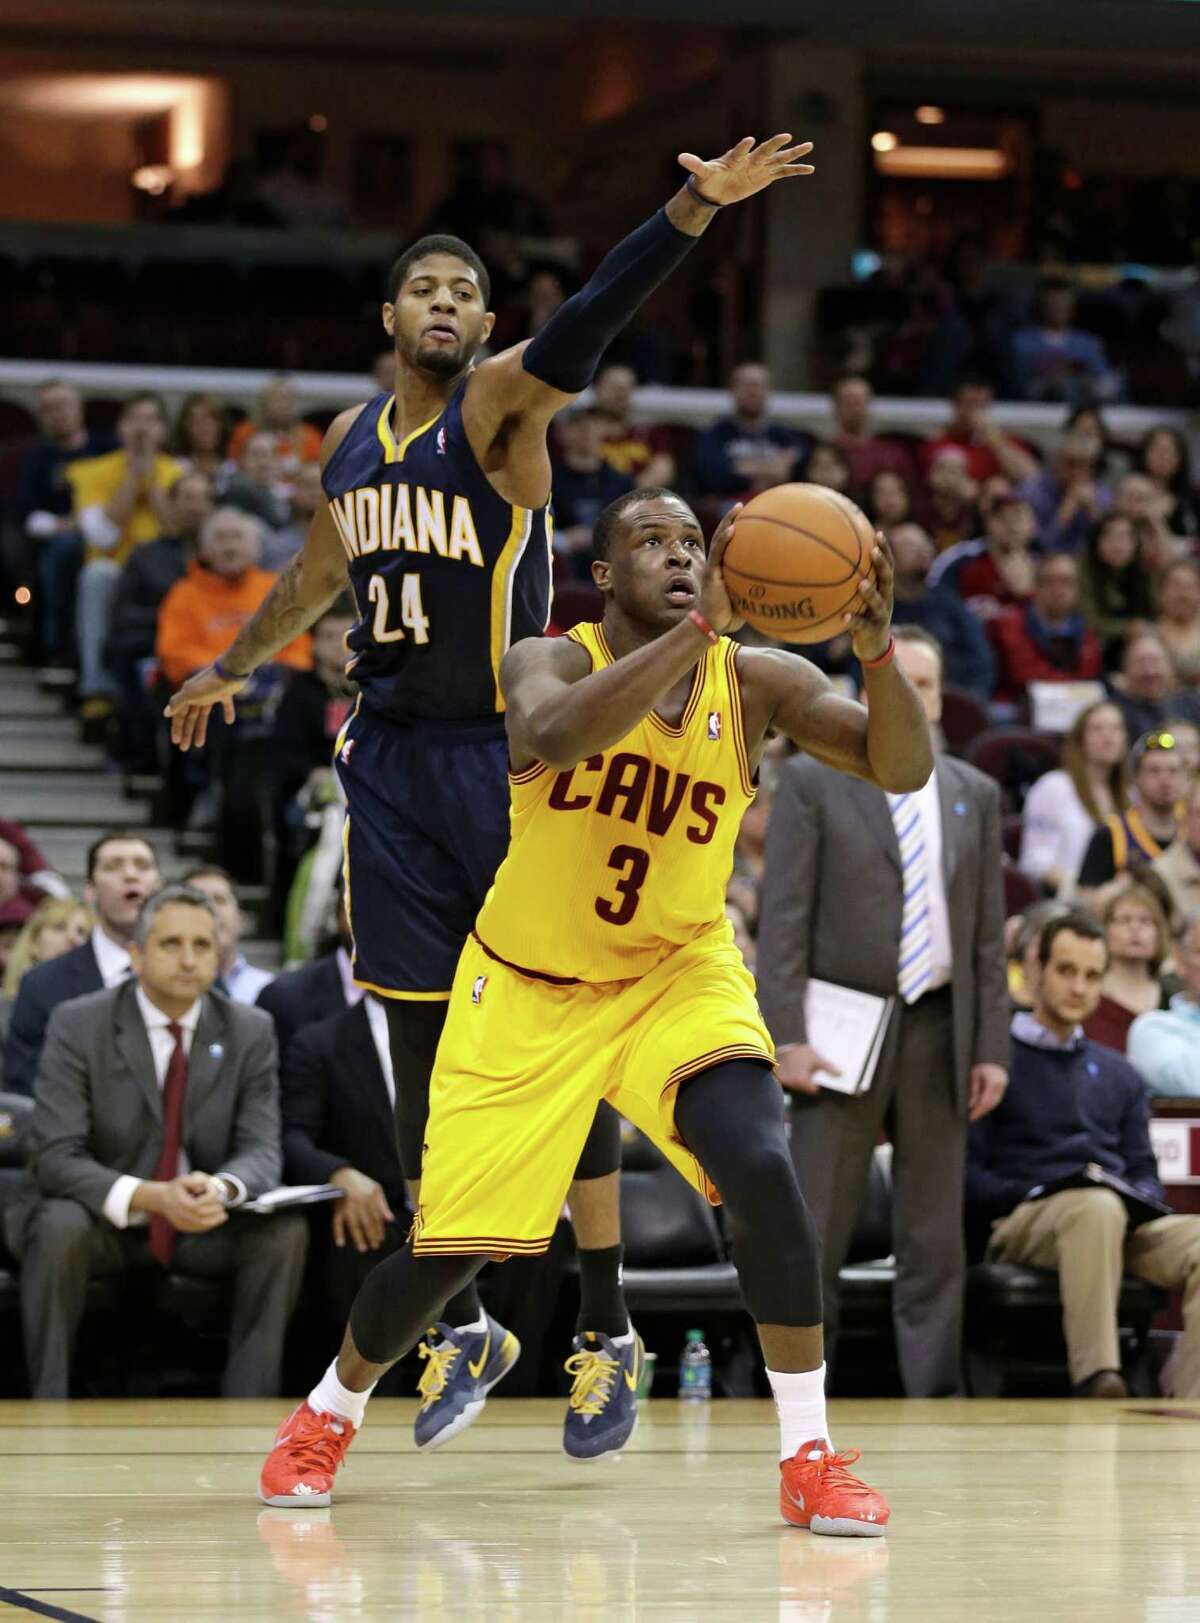 Dion Waiters, who led the Cavs with 19 points, shoots after getting past the Pacers' Paul George.